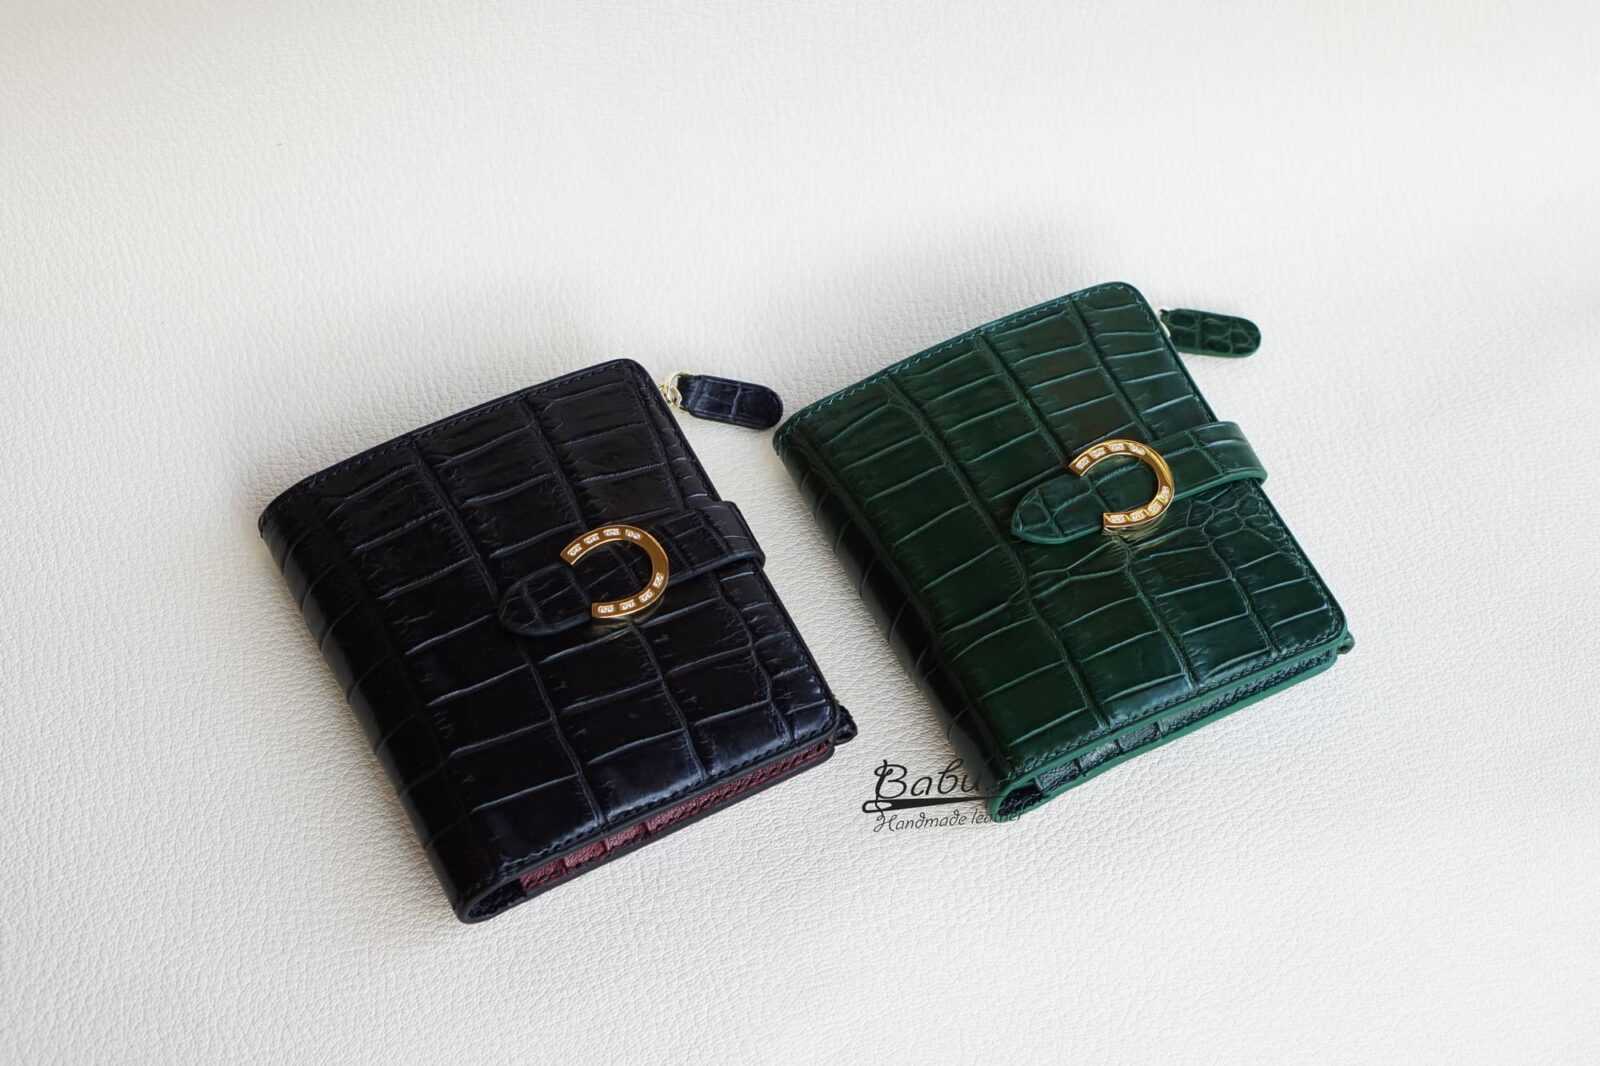 Women's Small Card Case Wallet with Flap. Mini Credit Card Holder. Croco Embossed Black